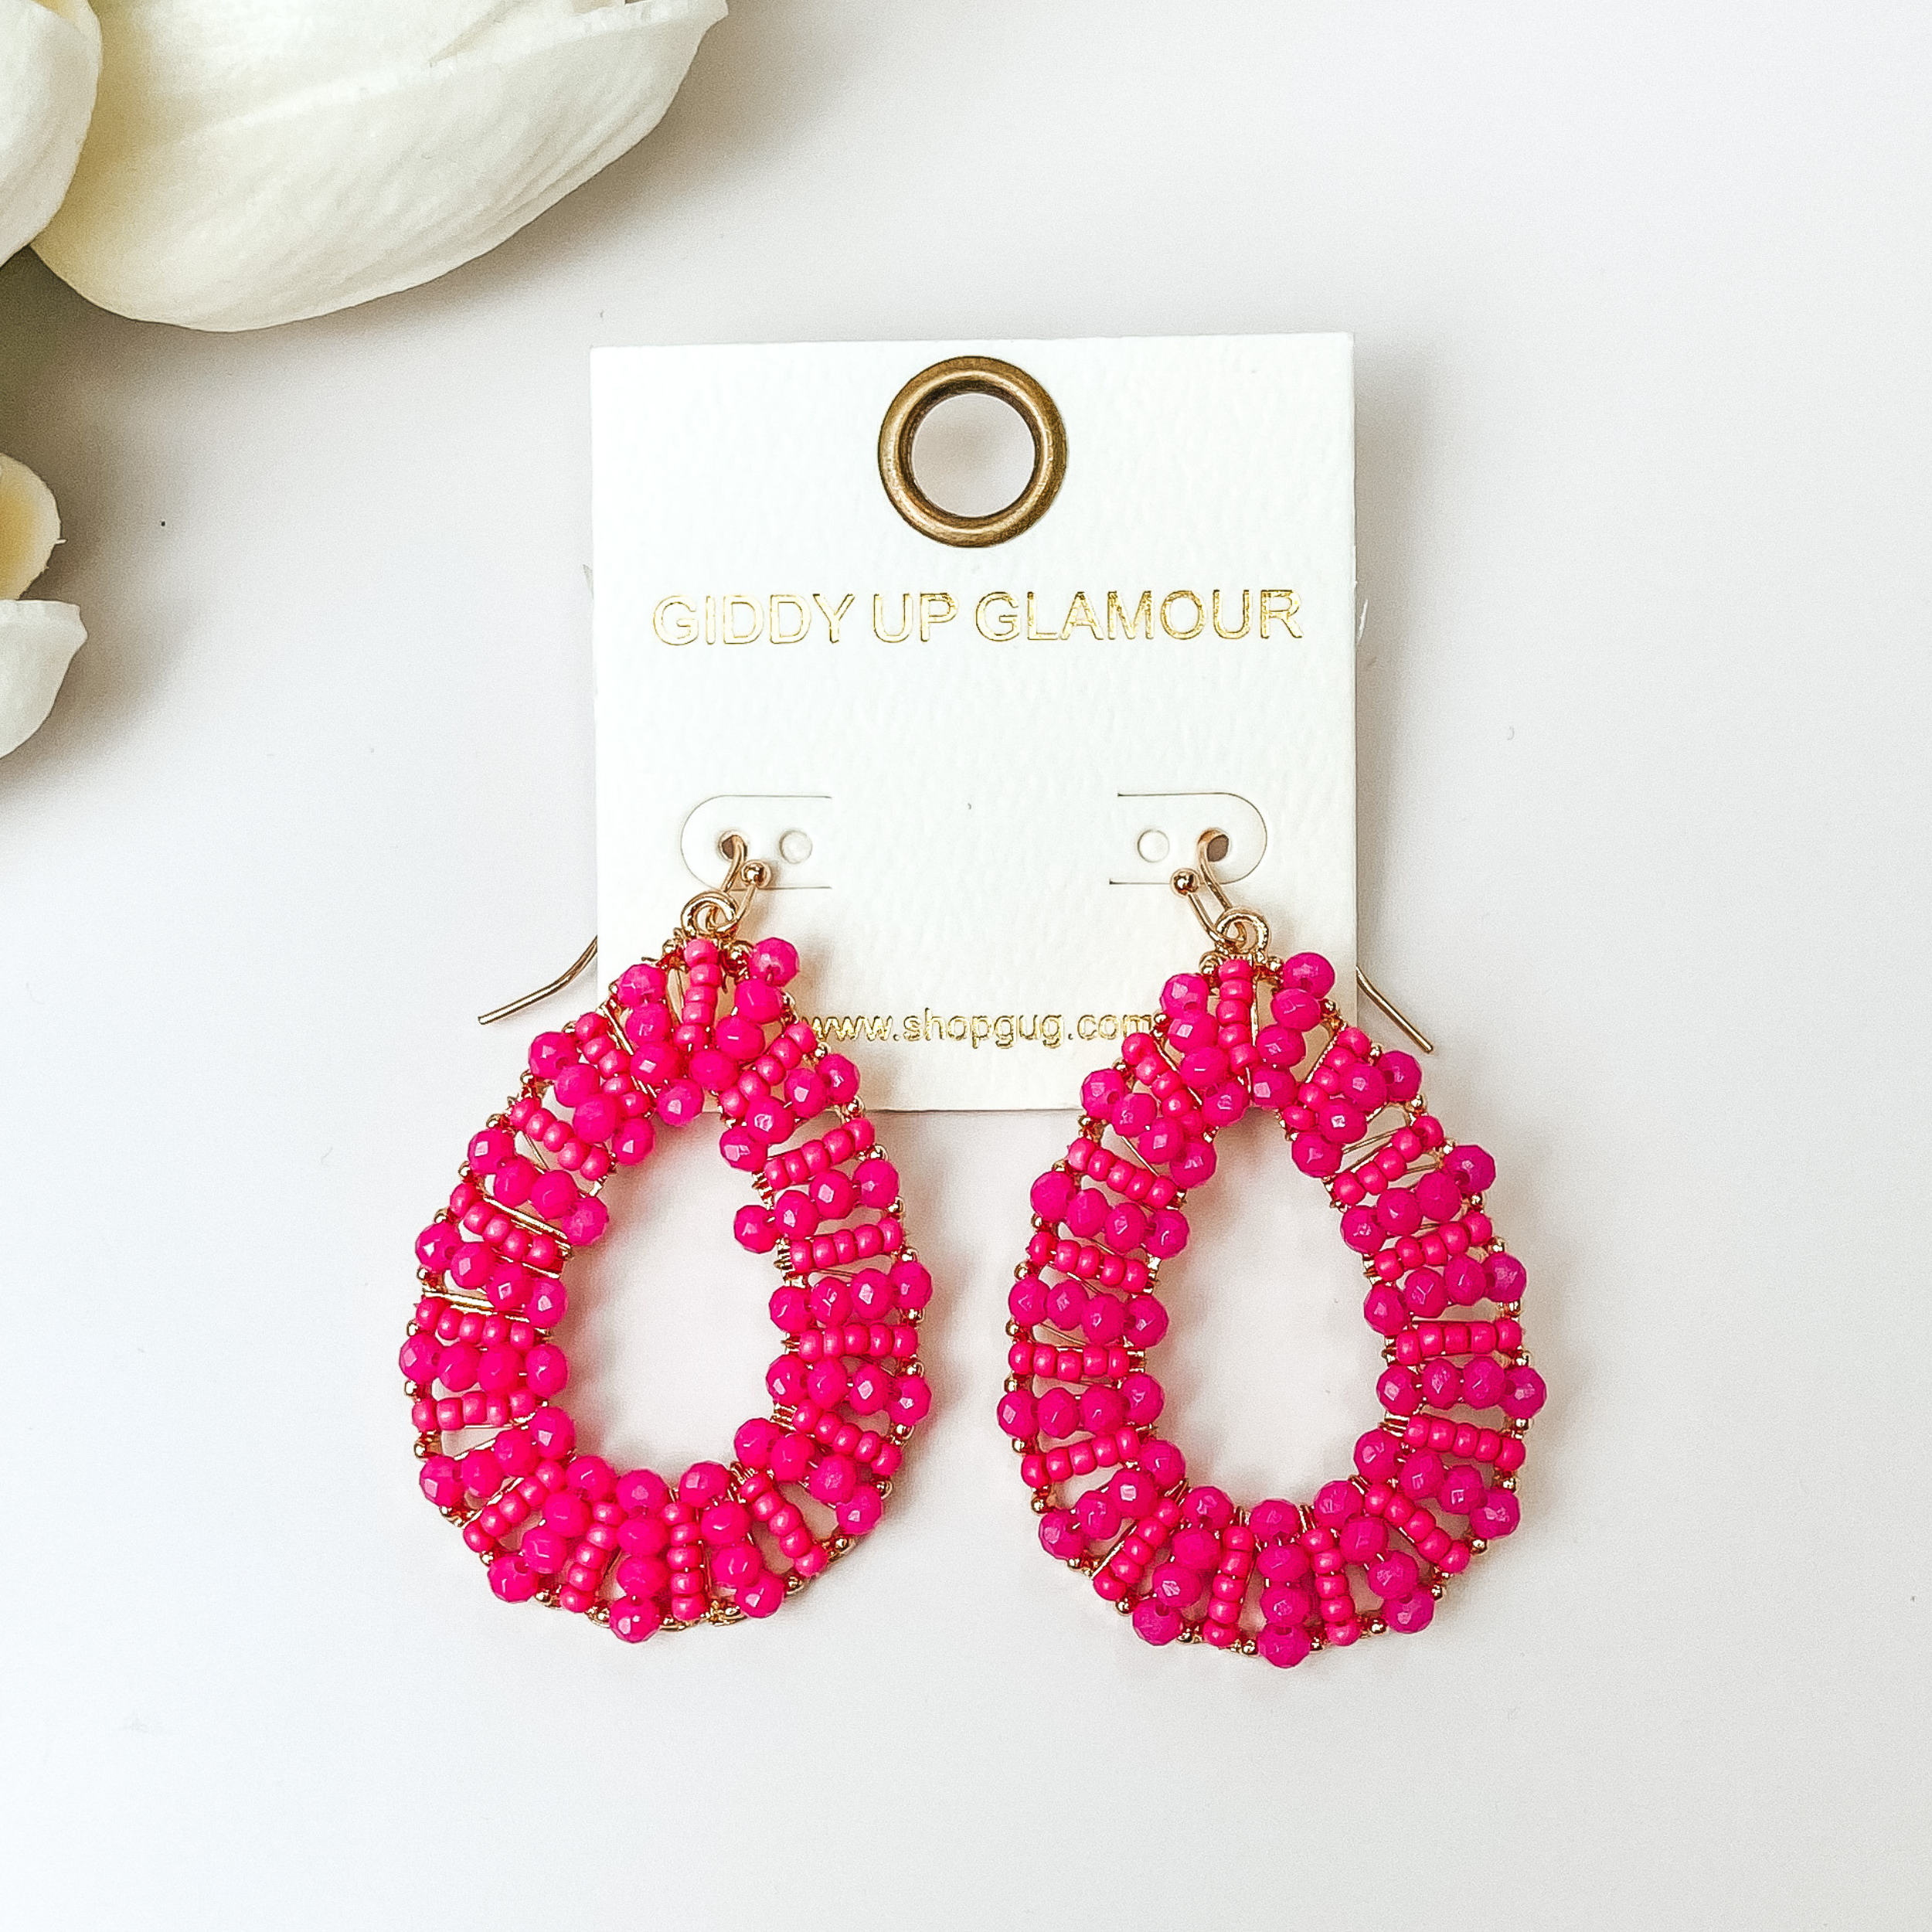 Gold undertone teardrop earrings with hot Pink Beads on a white background with white flowers.